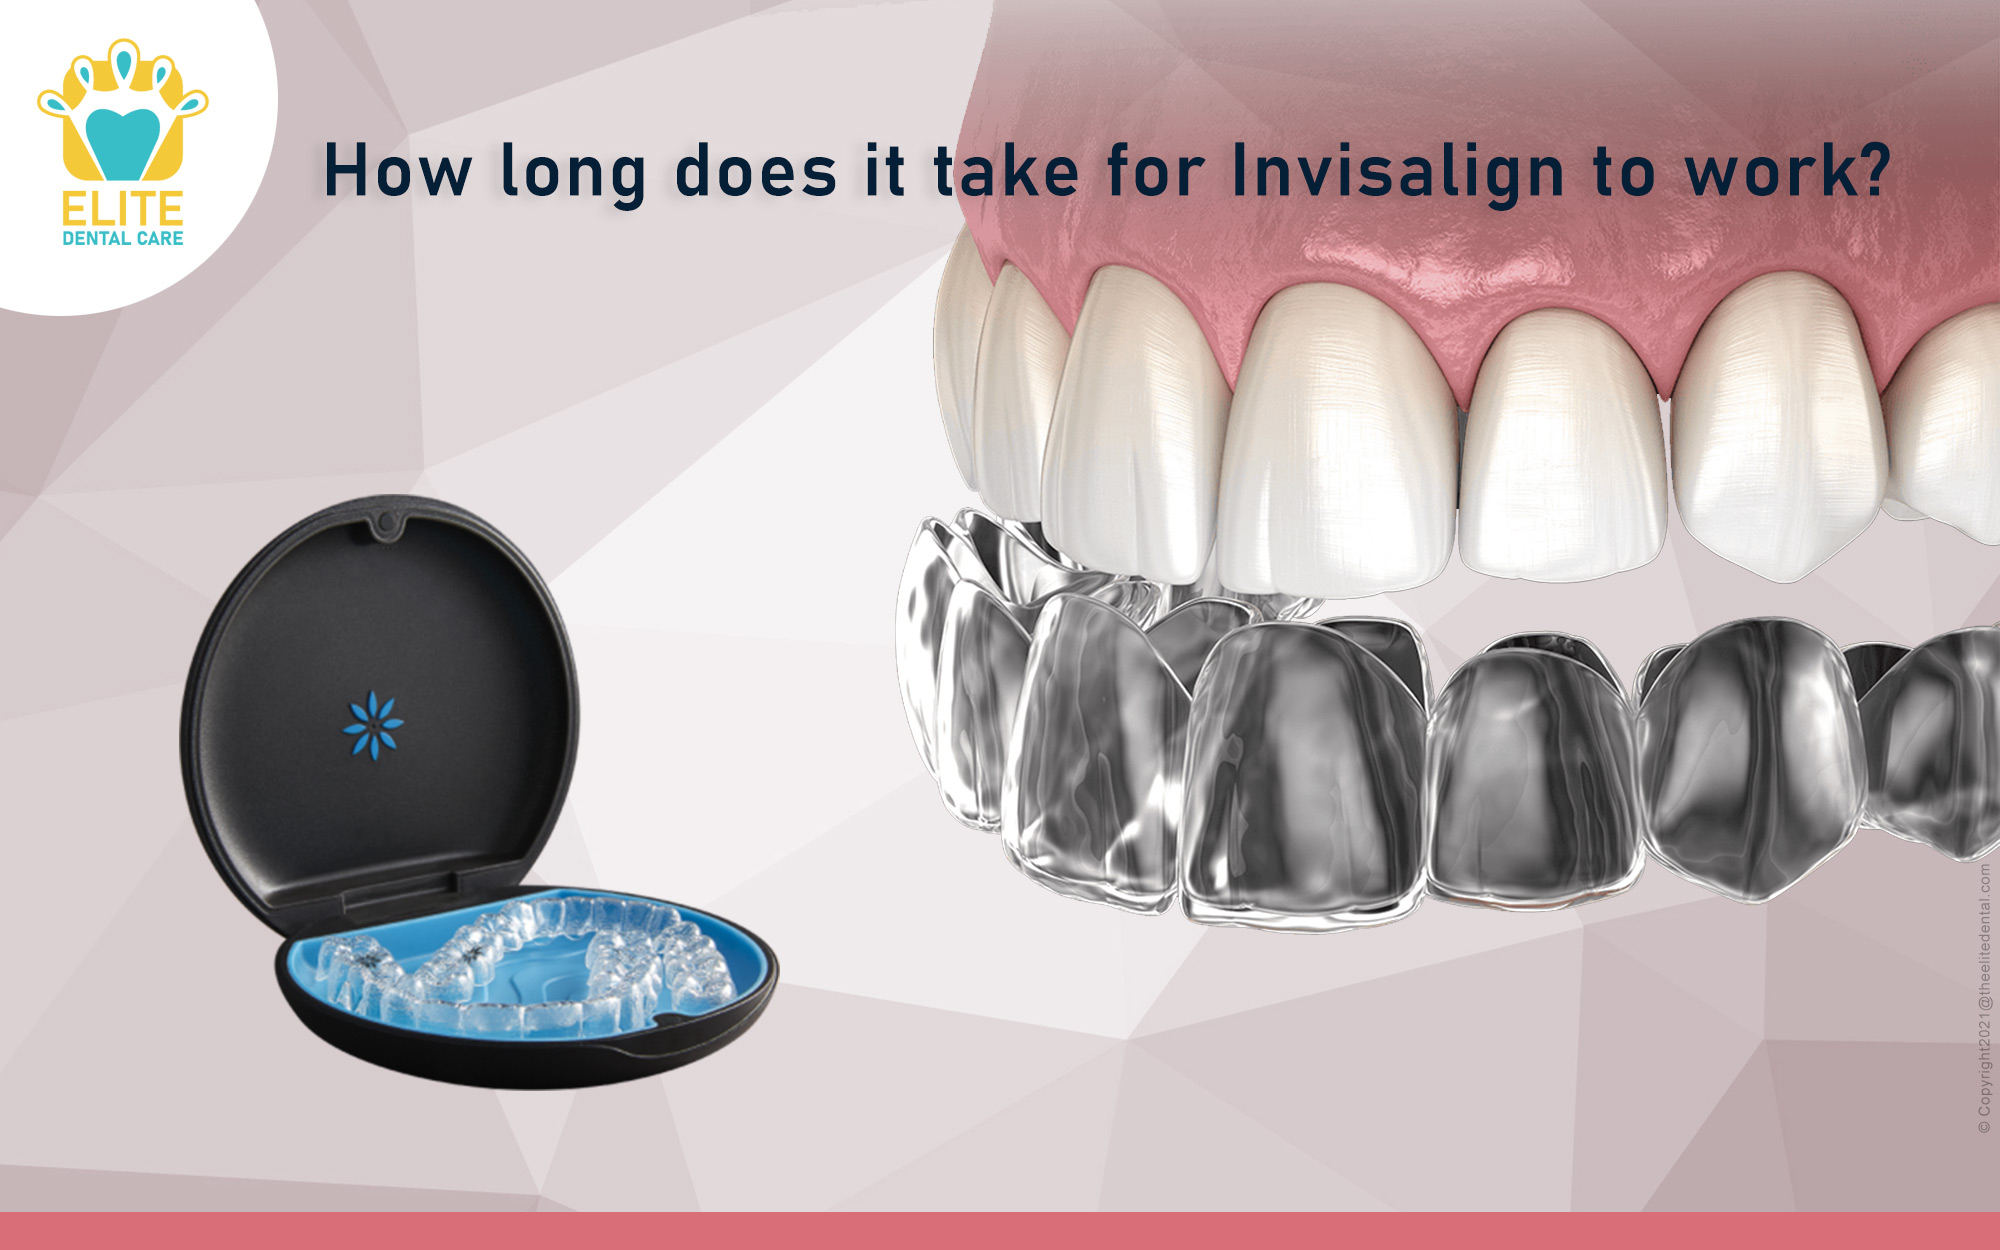 How much time does it take for Invisalign to work?